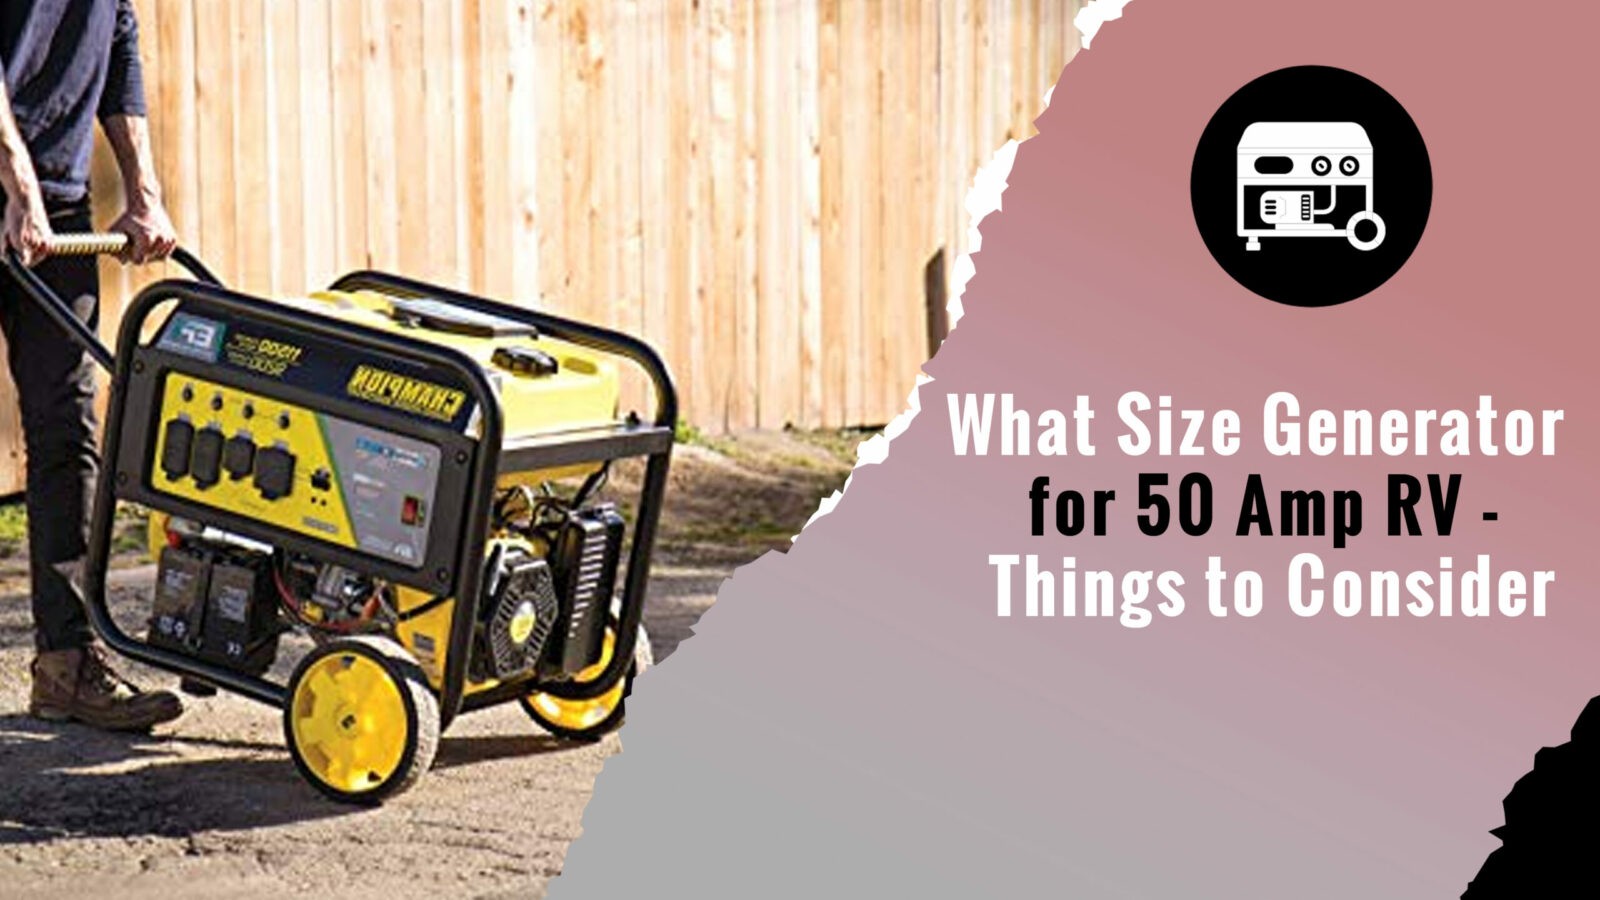 What Size Generator for 50 Amp RV - Things to Consider